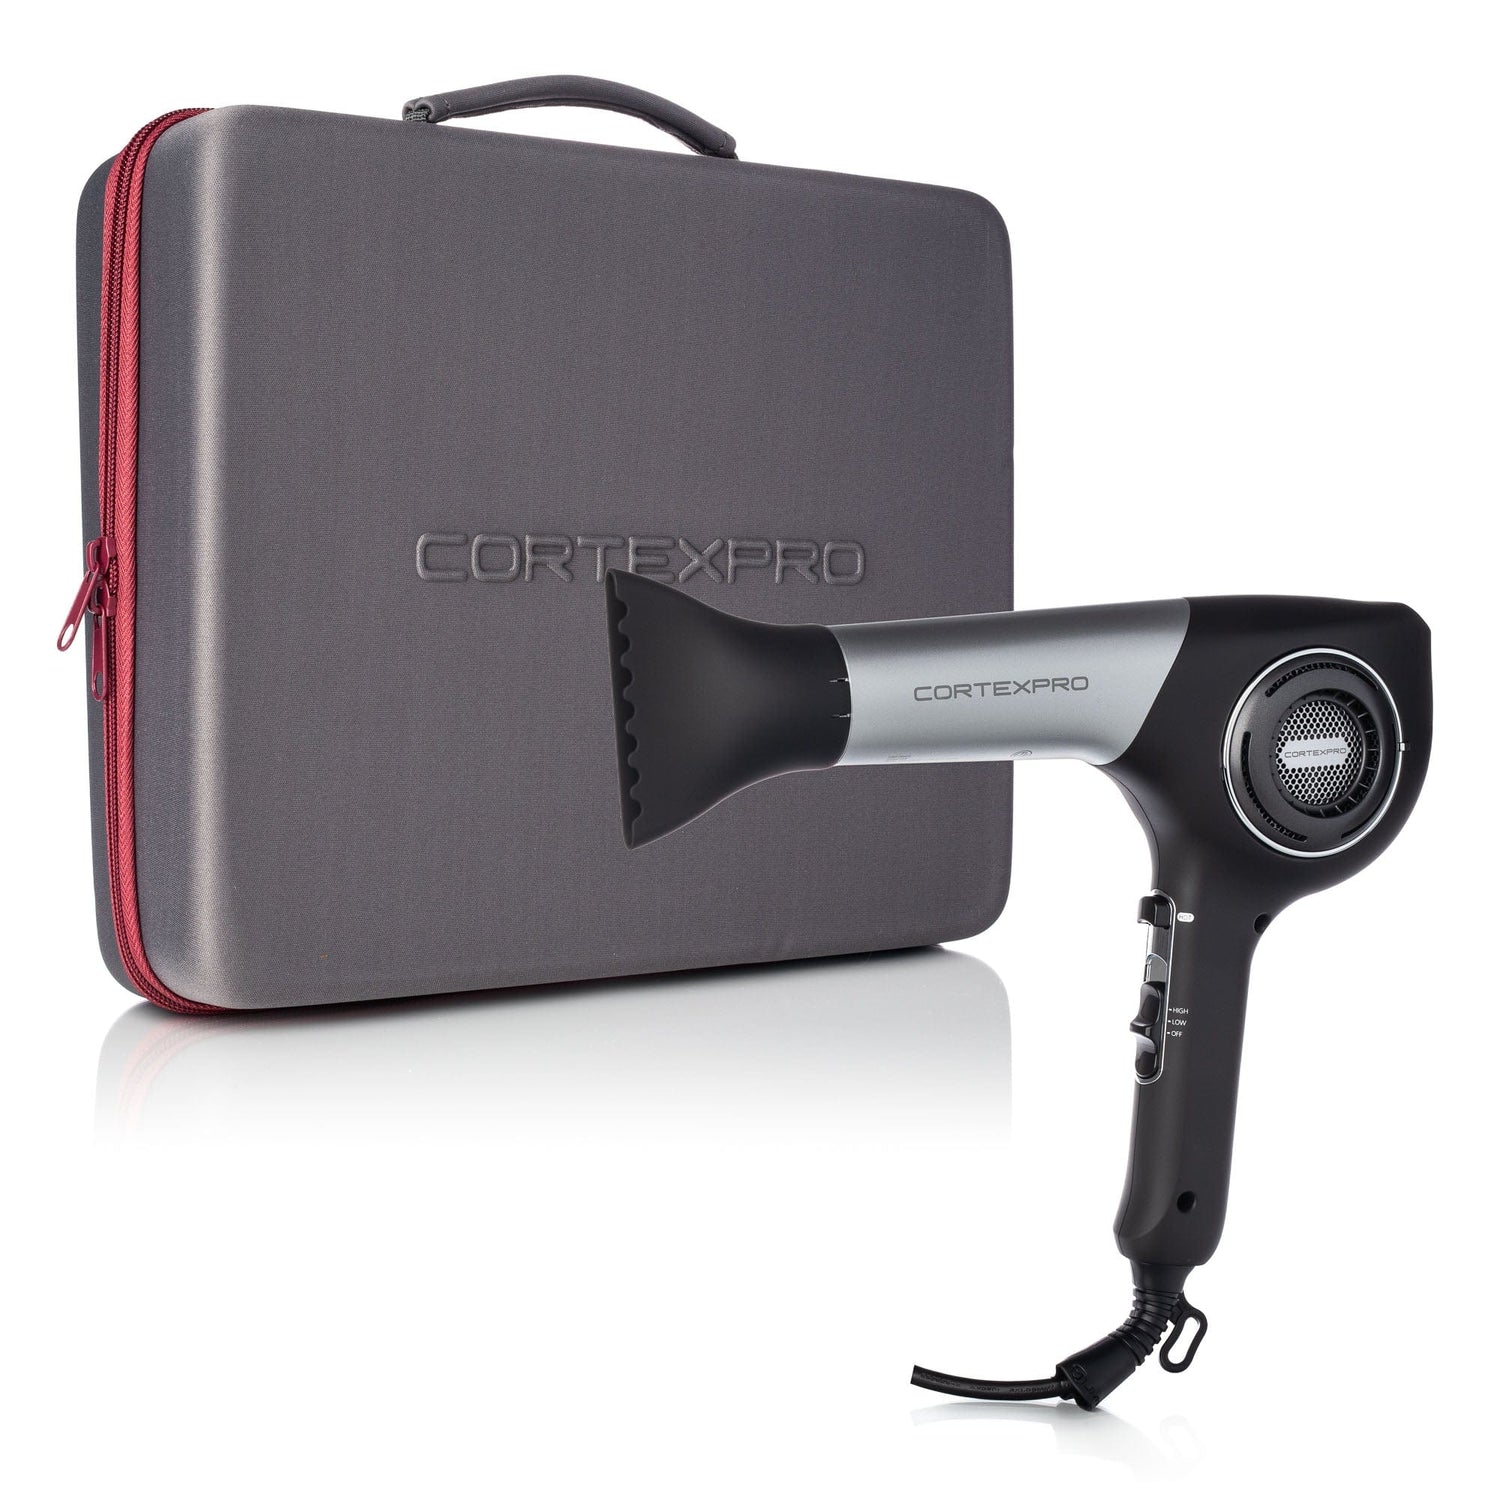 CortexPro The ProDryer with Anti-Frizz Technology with Traveling Case